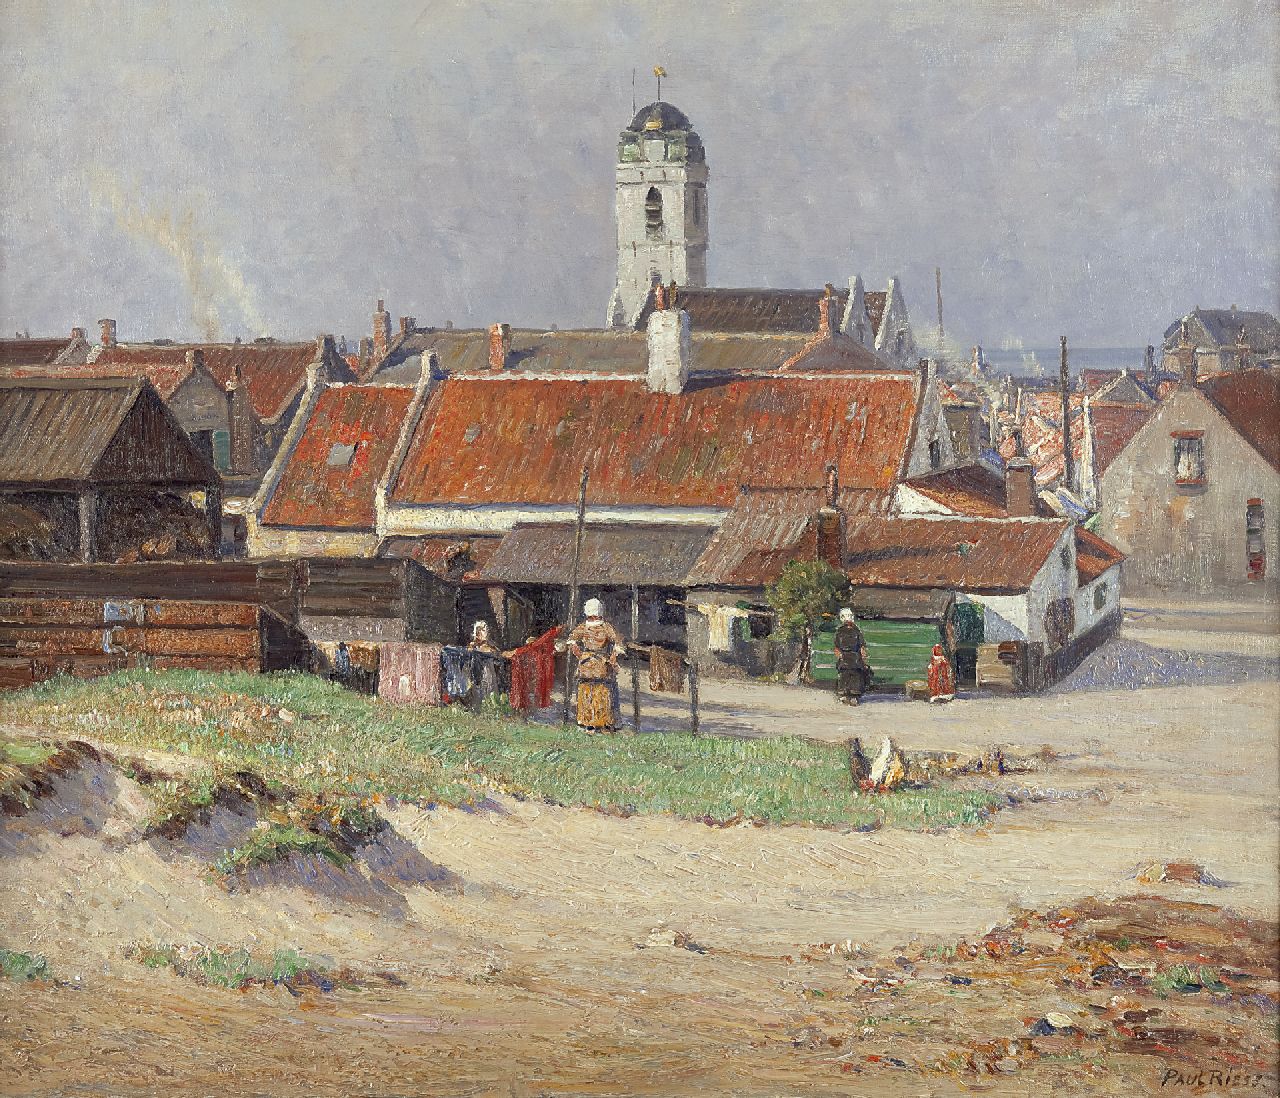 Riess P.  | Paul Riess, A View of Katwijk aan Zee with the Oude Kerk, Öl auf Leinwand 60,9 x 70,6 cm, signed l.r.